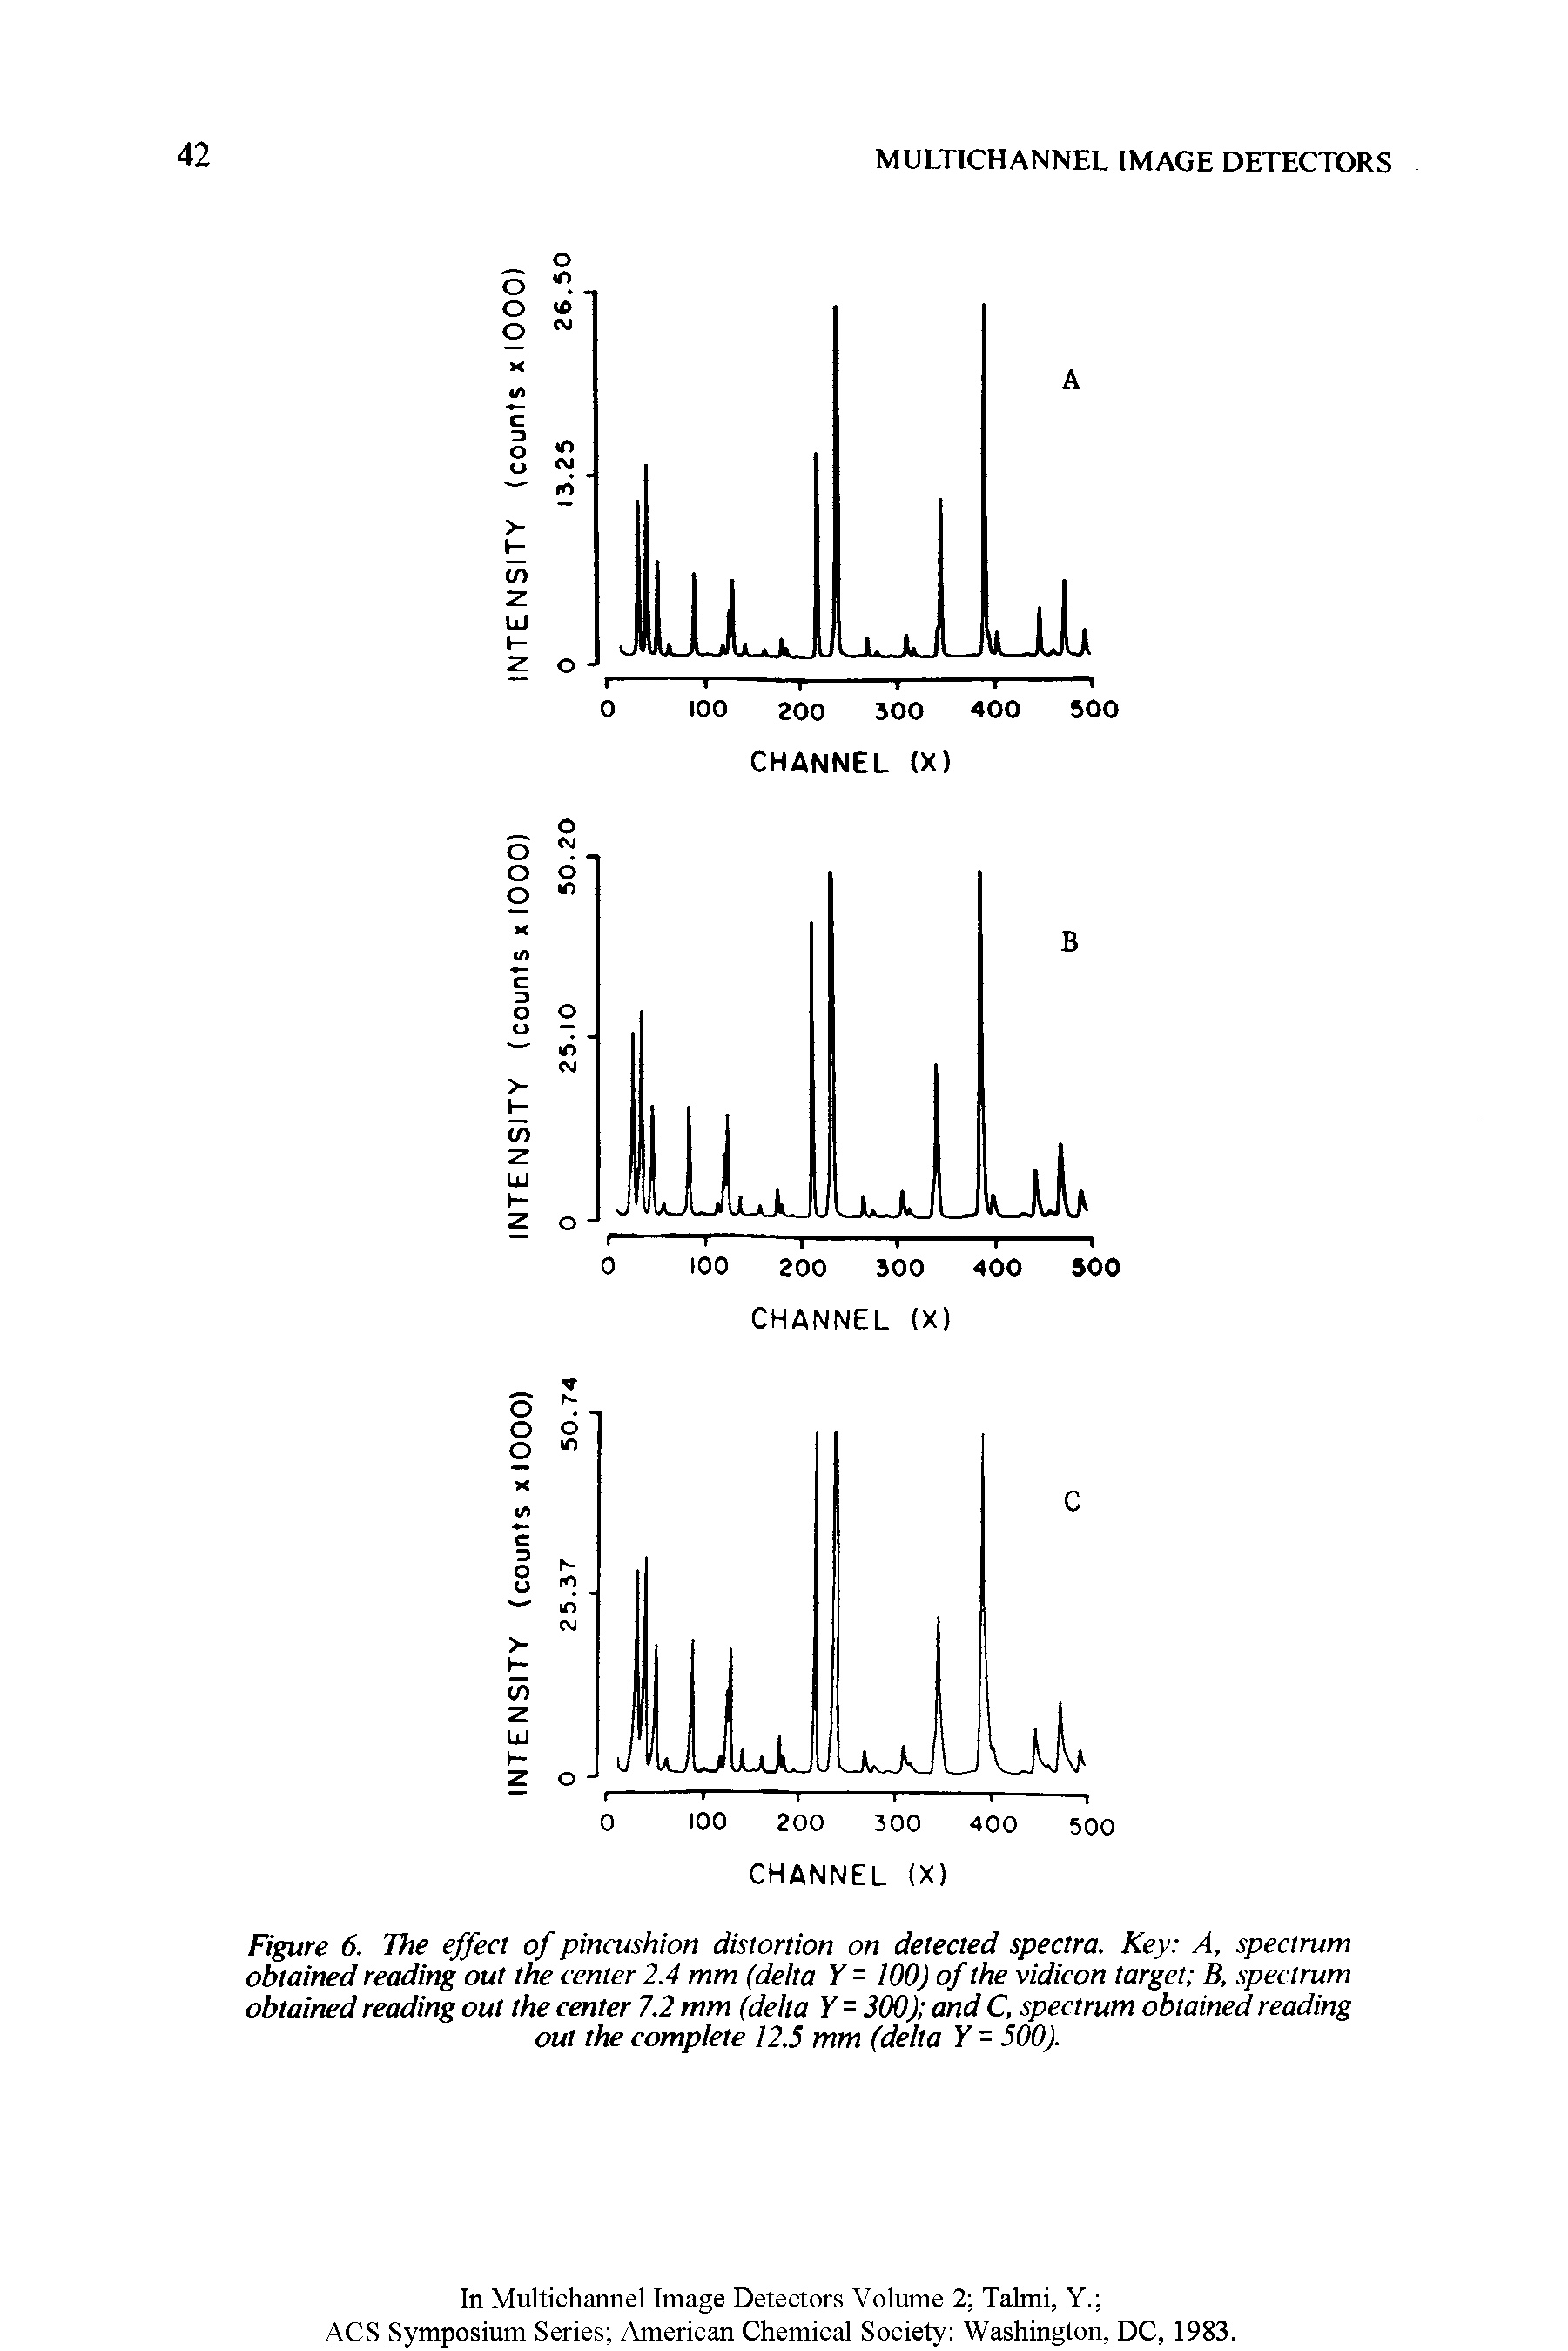 Figure 6. The effect of pincushion distortion on detected spectra. Key A, spectrum obtained reading out the center 2.4 mm (delta Y = 100) of the vidicon target B, spectrum obtained reading out the center 7.2 mm (delta Y - 300) and C, spectrum obtained reading out the complete 12.5 mm (delta Y - 500).